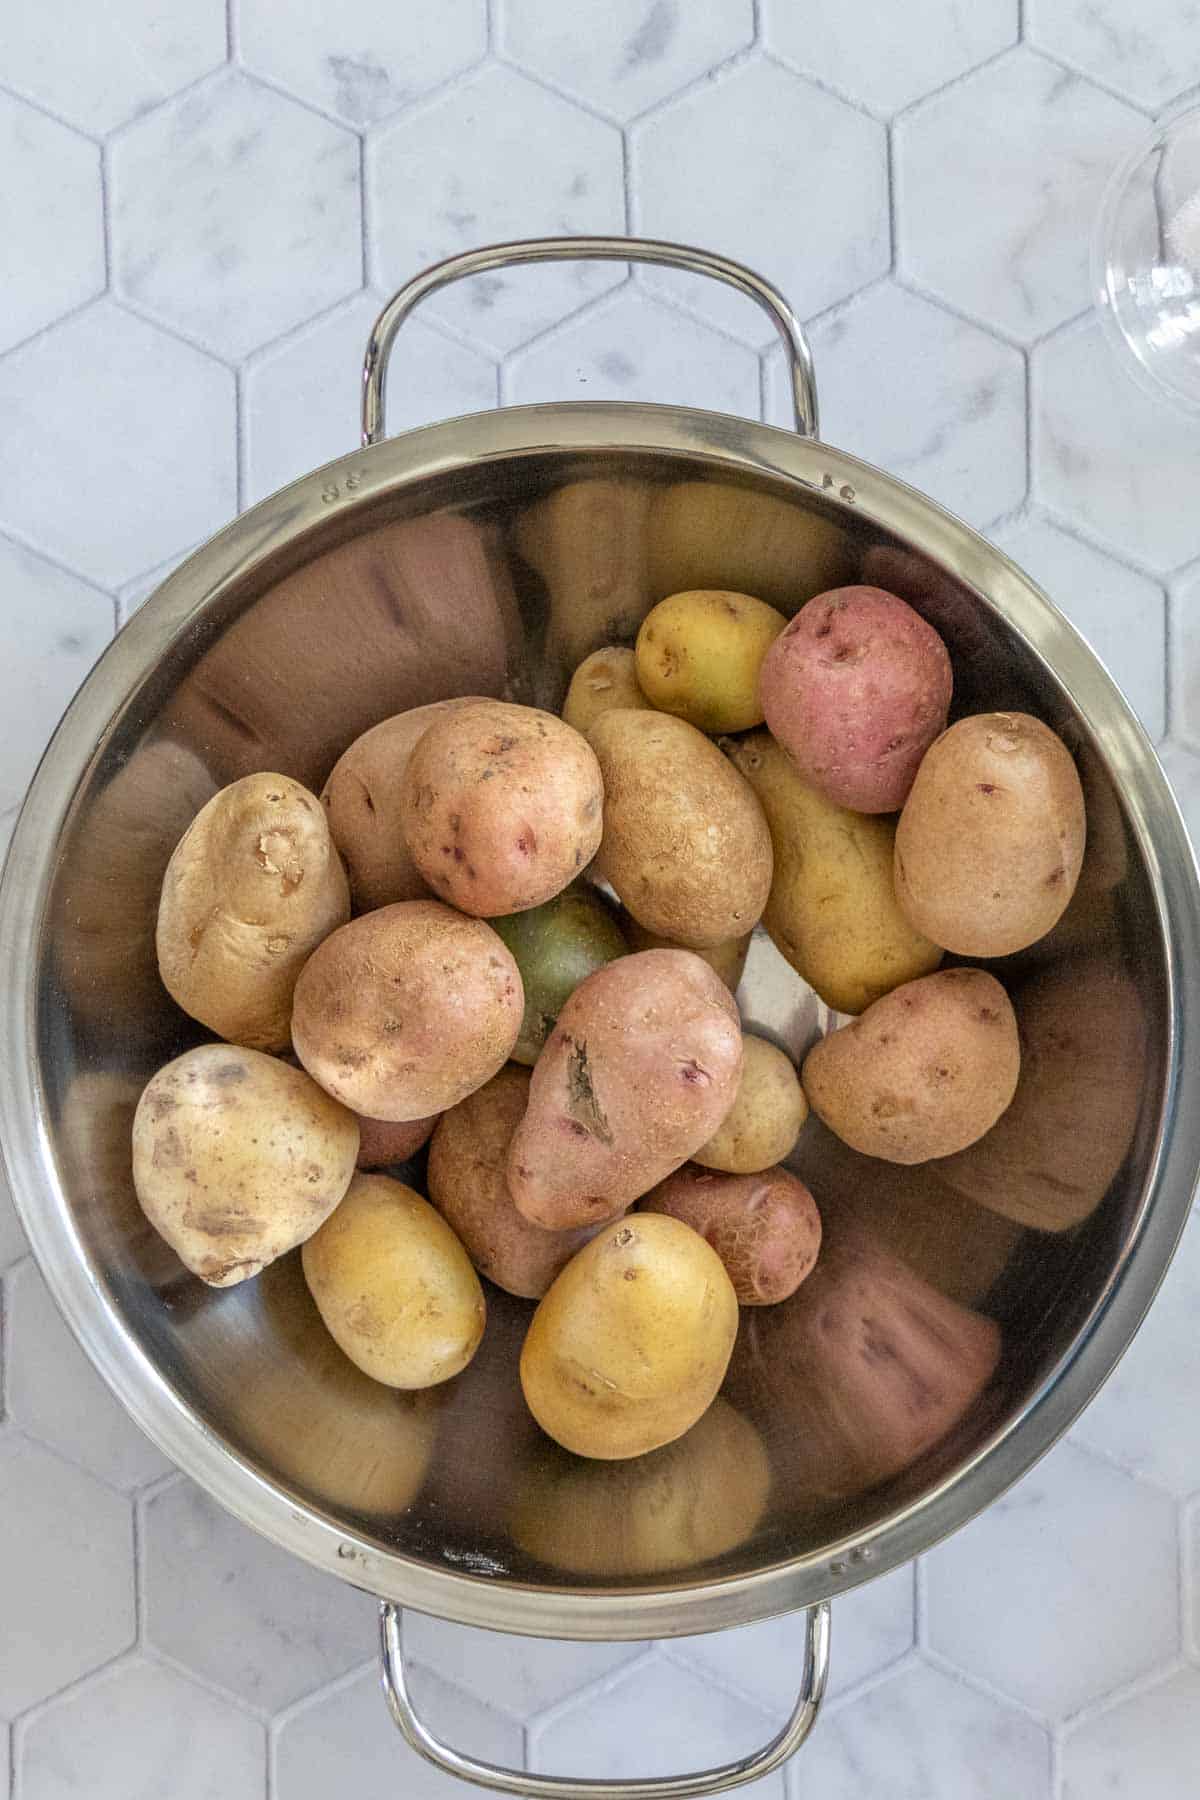 How to Parboil Potatoes